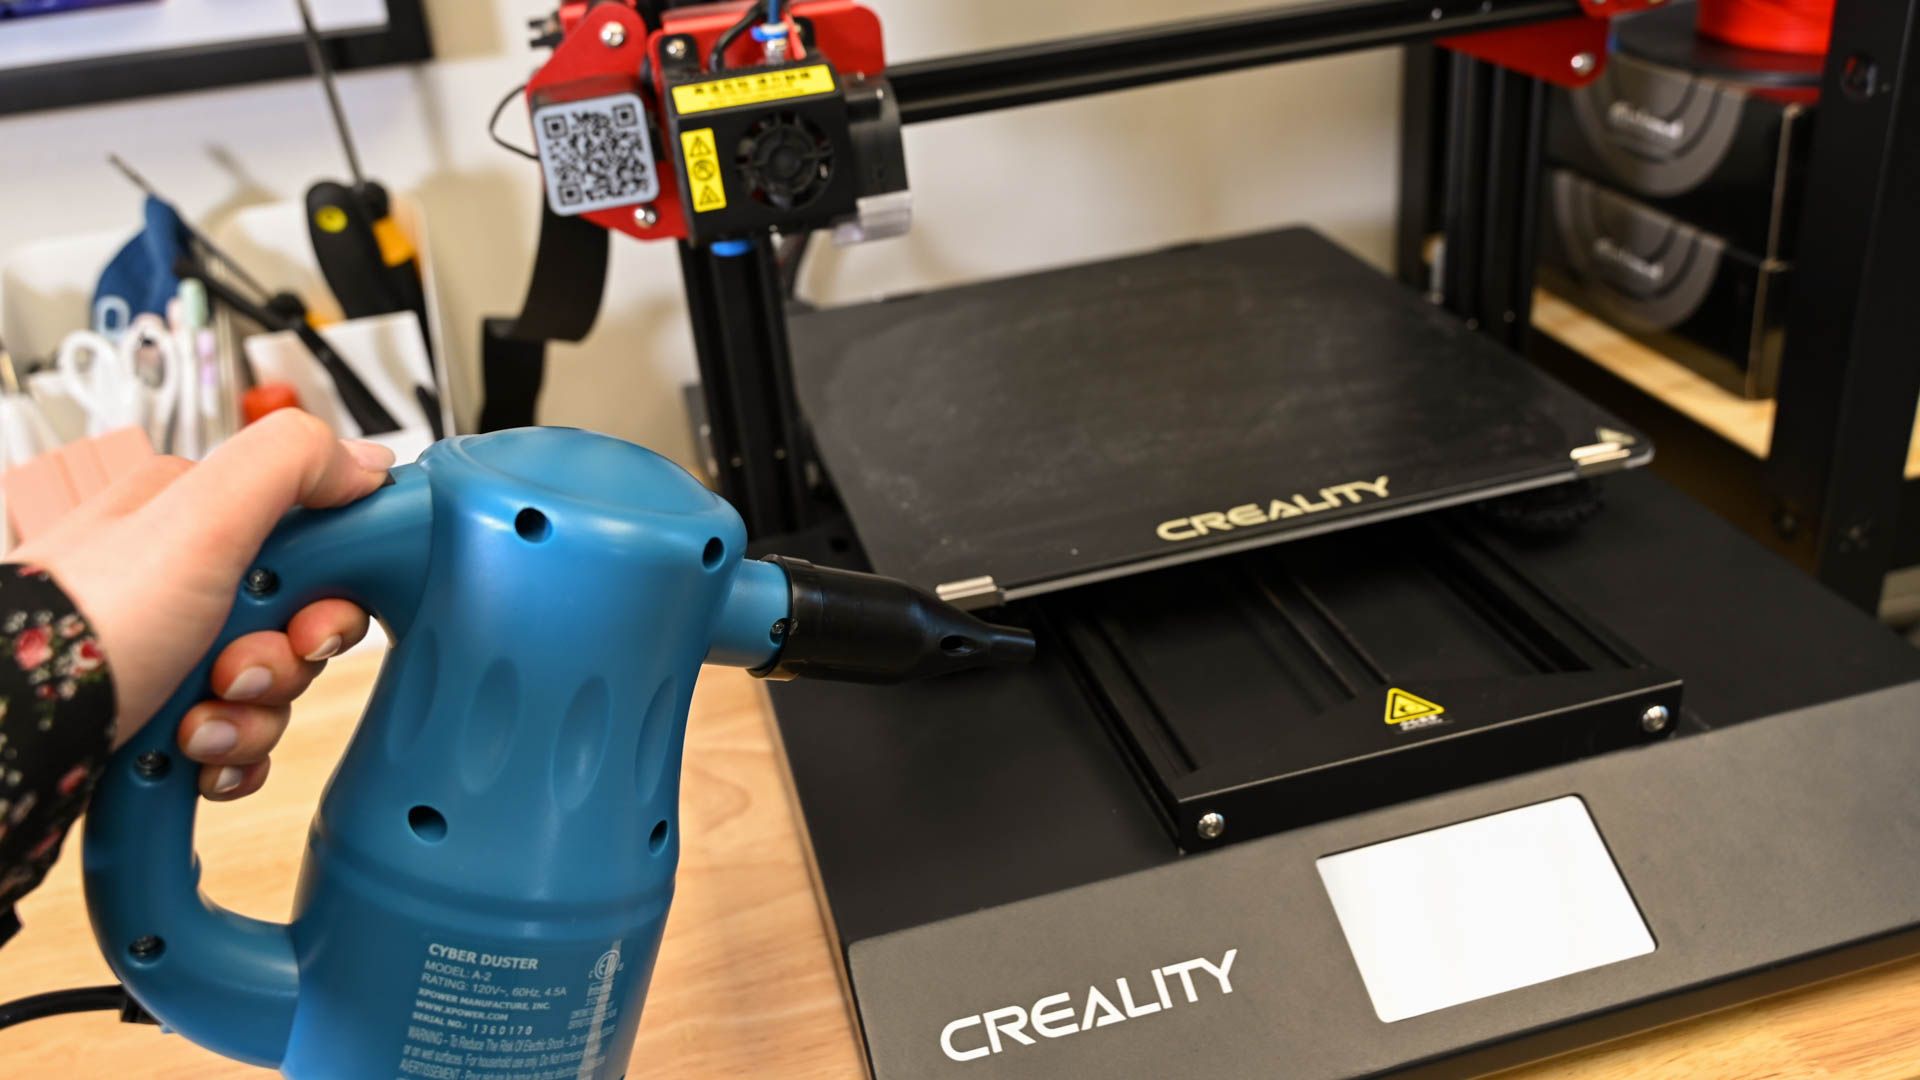 Using the XPOWER Electric Air Duster to dust a Creality 3D printer